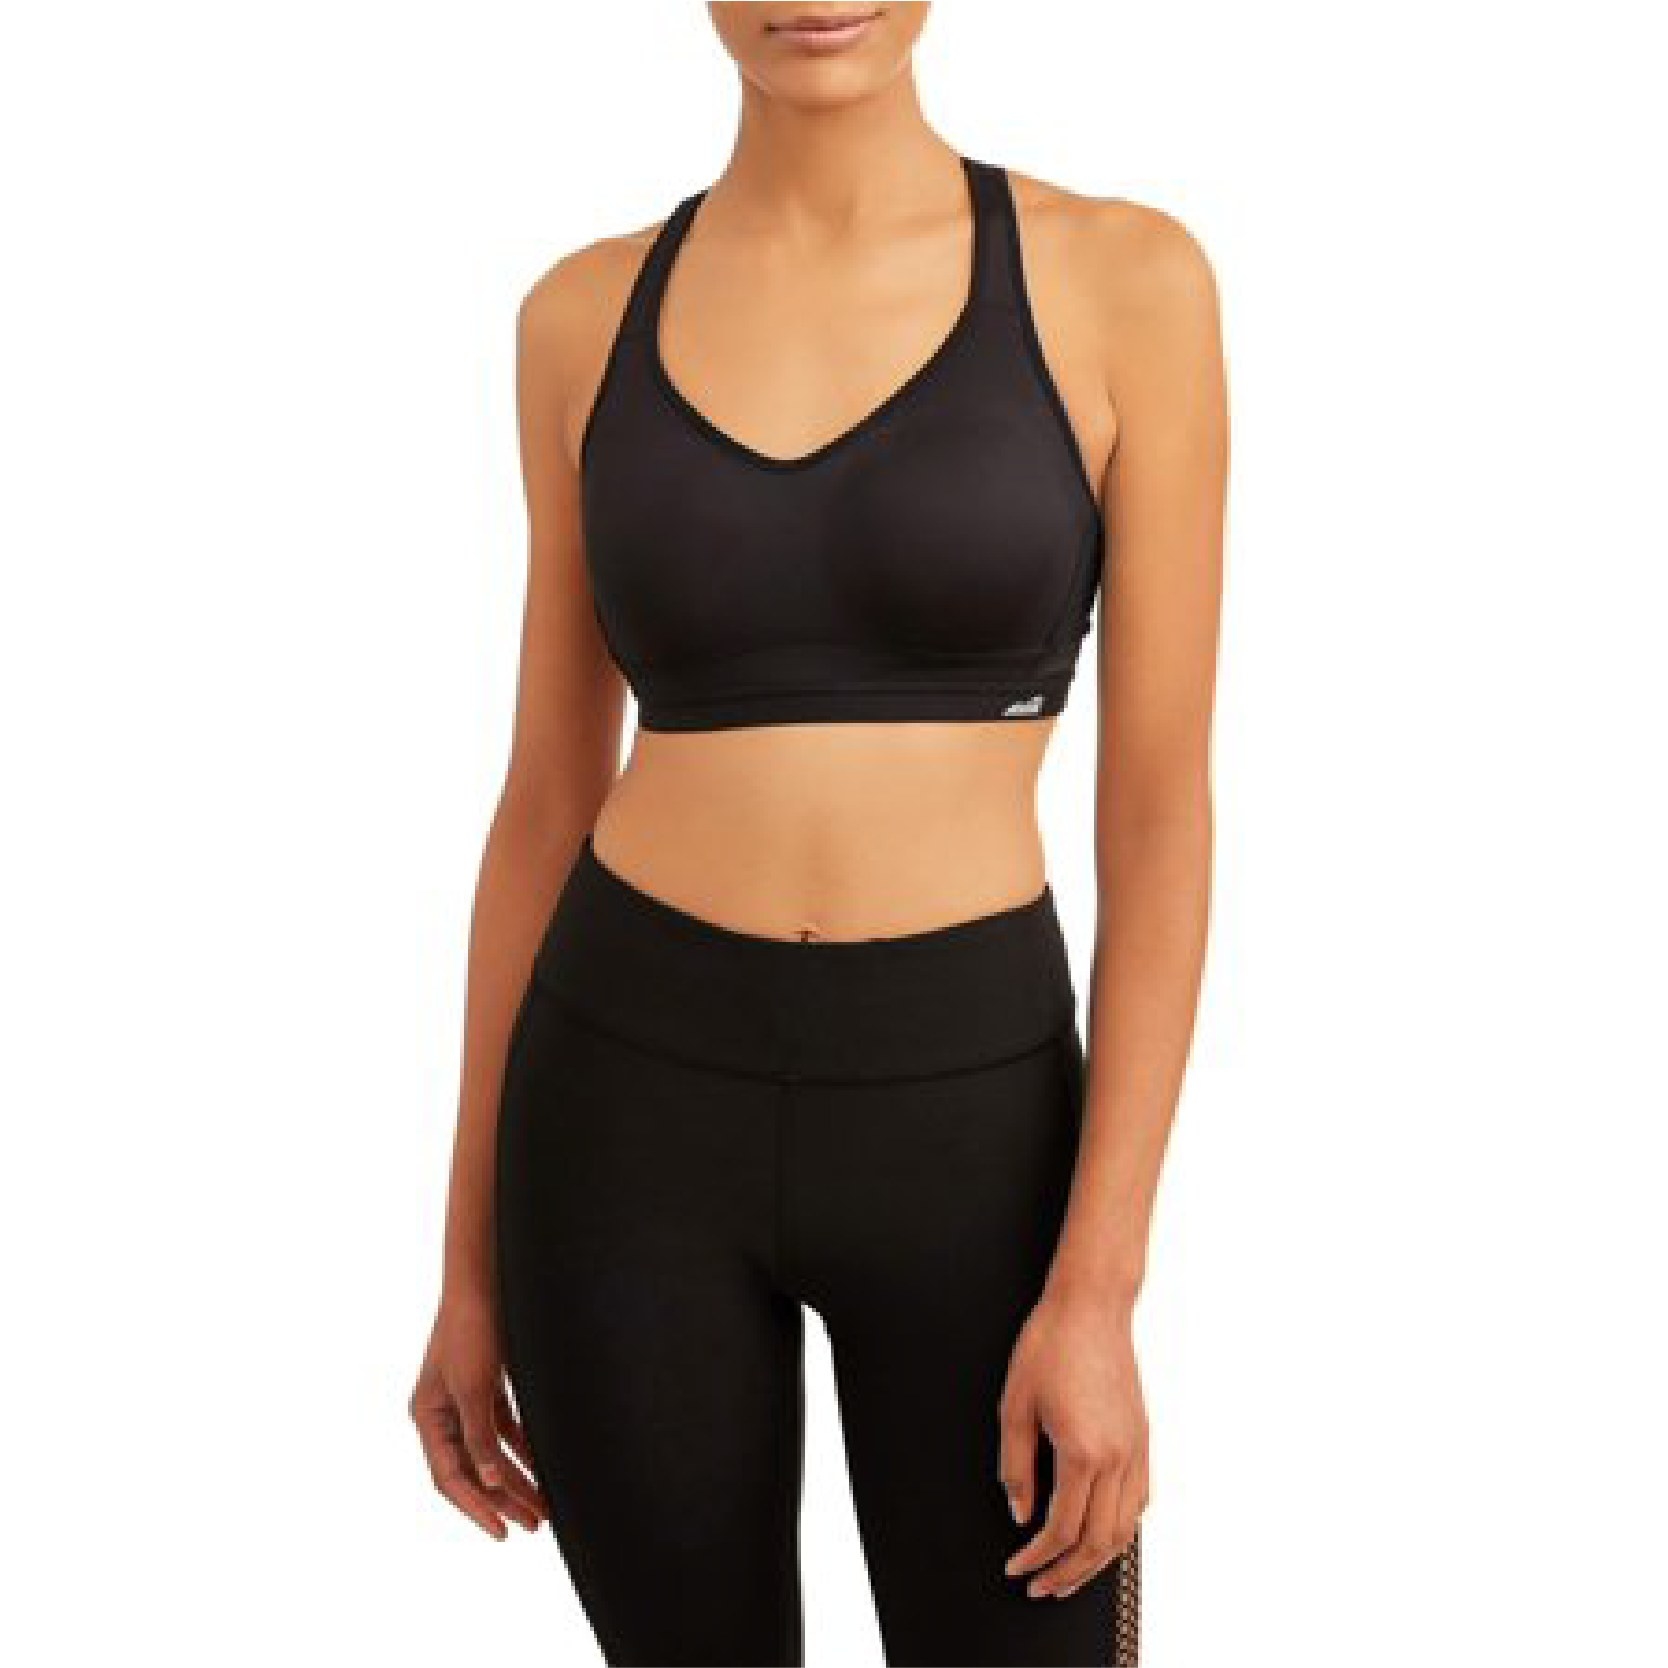 Model wearing the black sports bra with molded cups